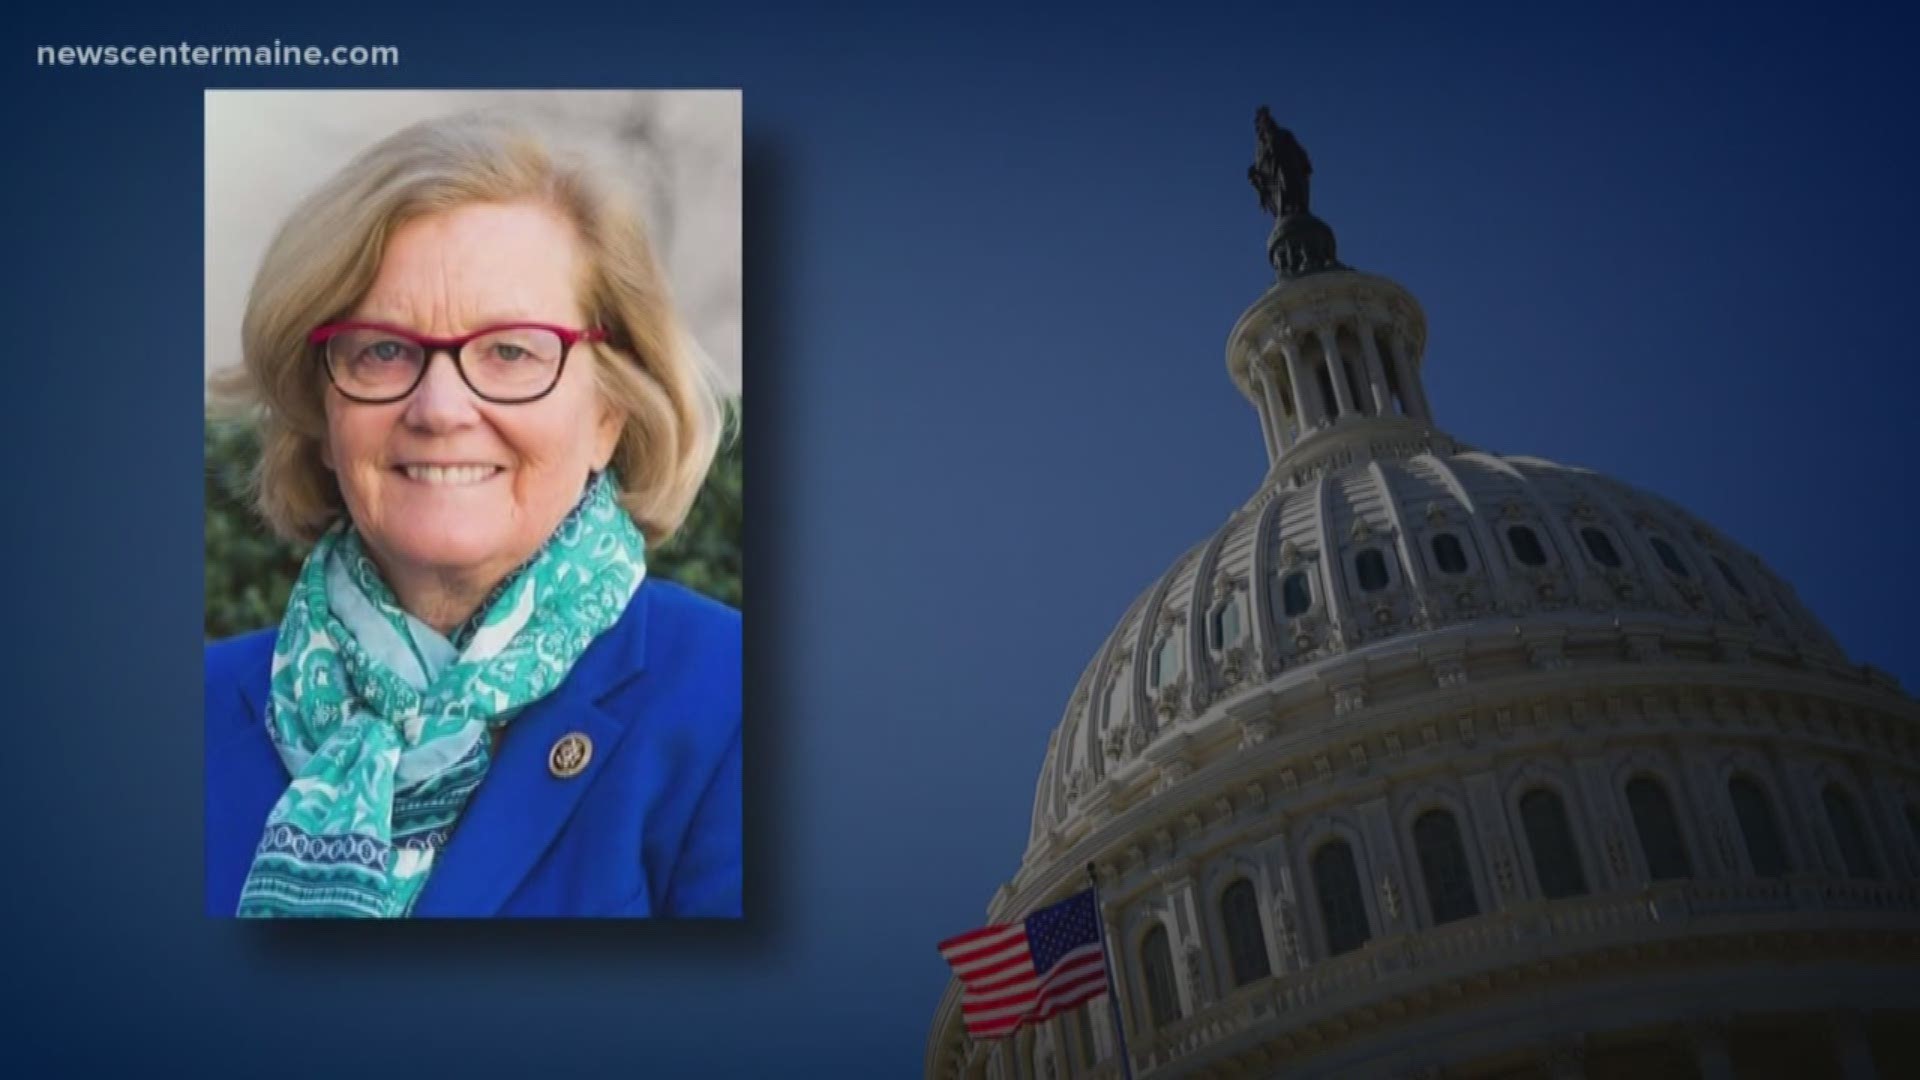 Dustin Wlodkowski is profiling the three candidates seeking that seat--- The incumbent-- Democrat Chellie Pingree, Republican Mark Holbrook. Independent Marty Grohman. Tonight he features Chellie Pingree.